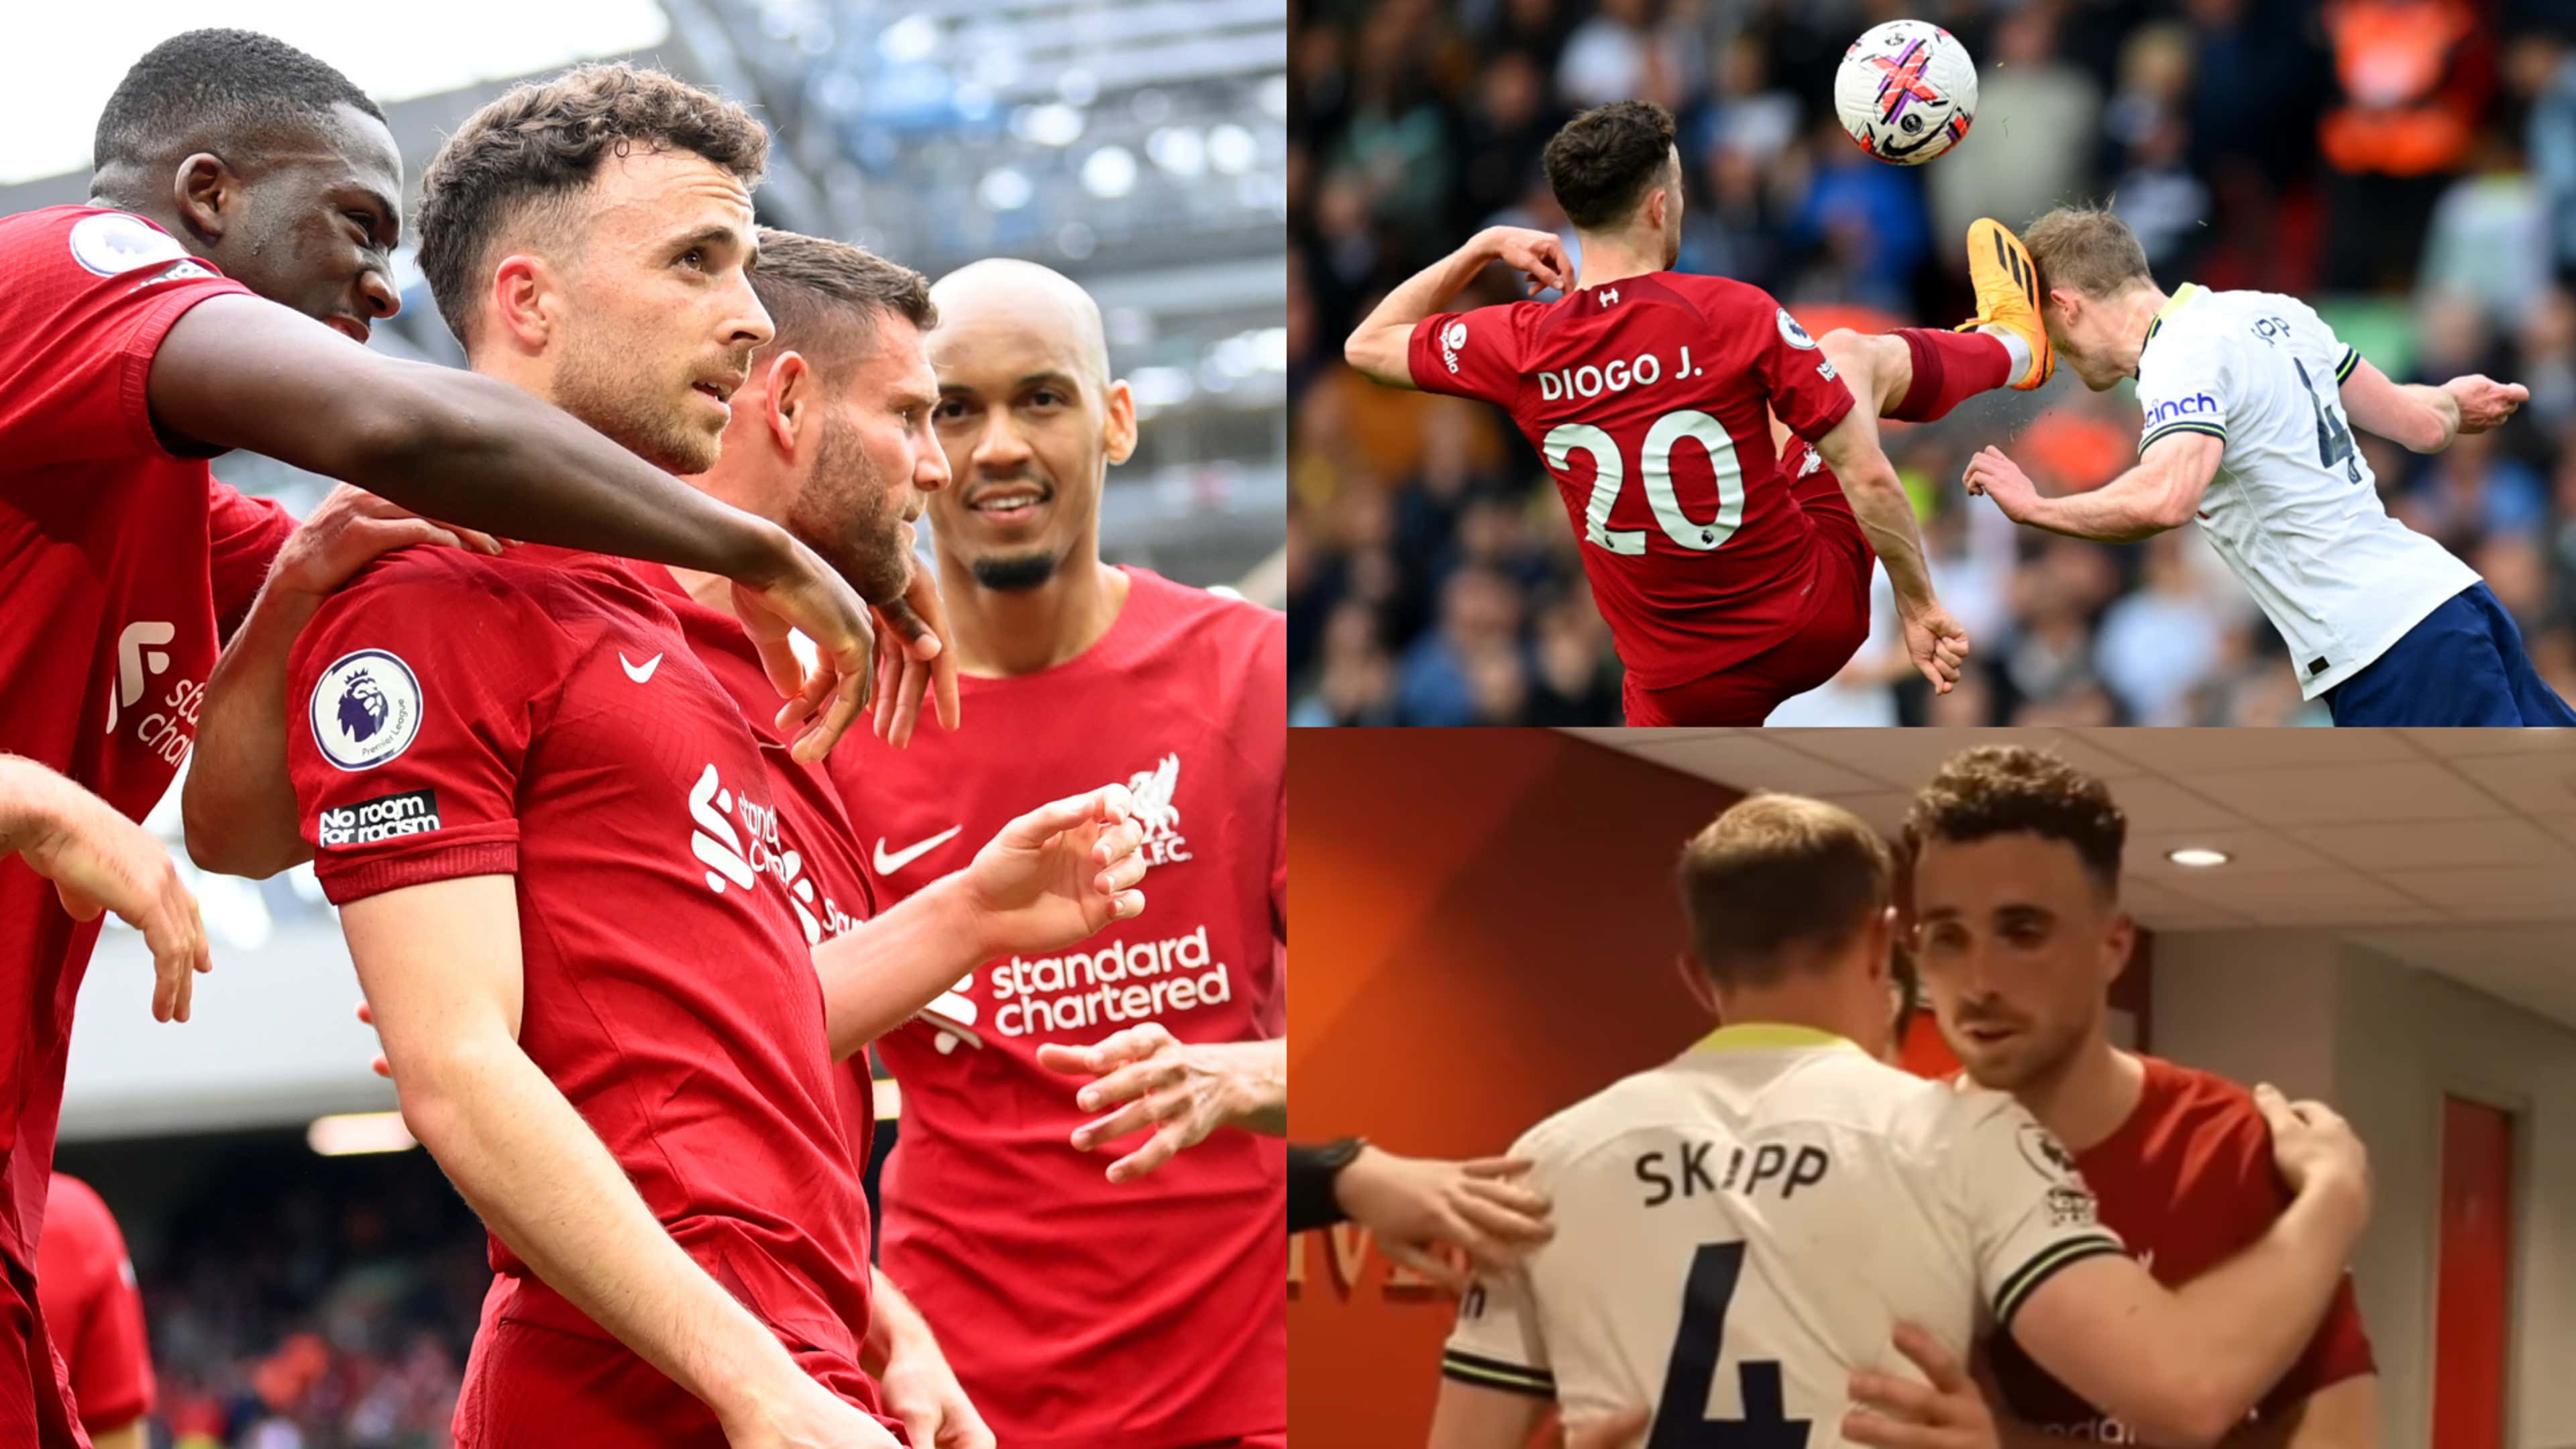 WATCH: Diogo Jota & Oliver Skipp embrace in Anfield tunnel after high ...